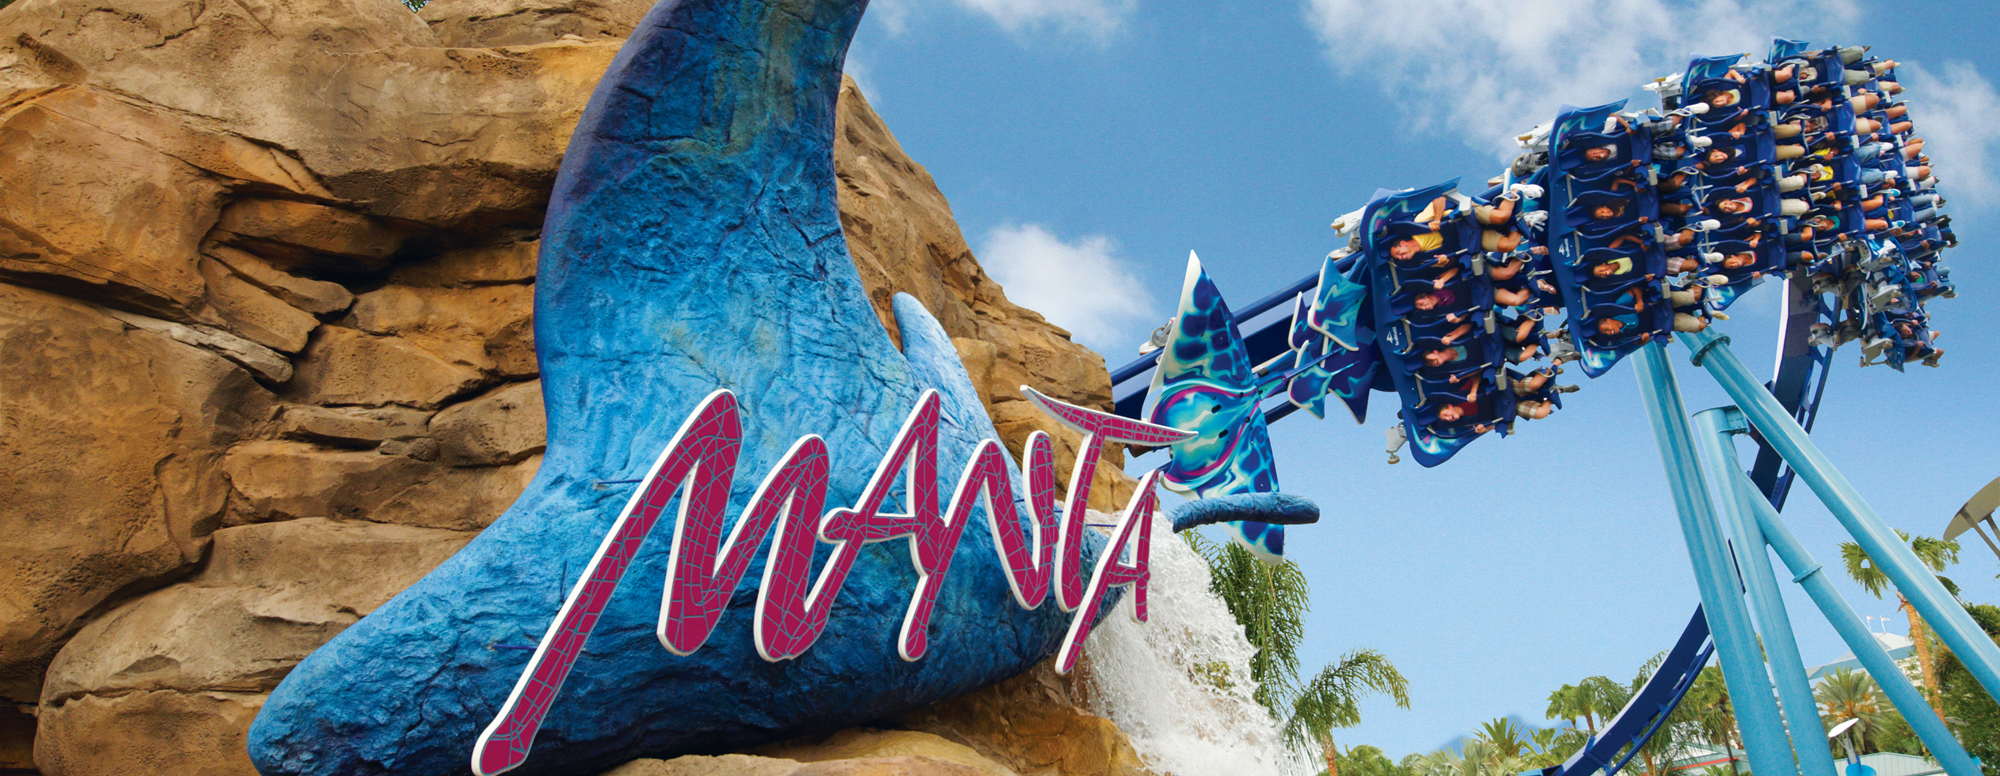 Special Savings to Kissimmee and SeaWorld Parks & Entertainment ®